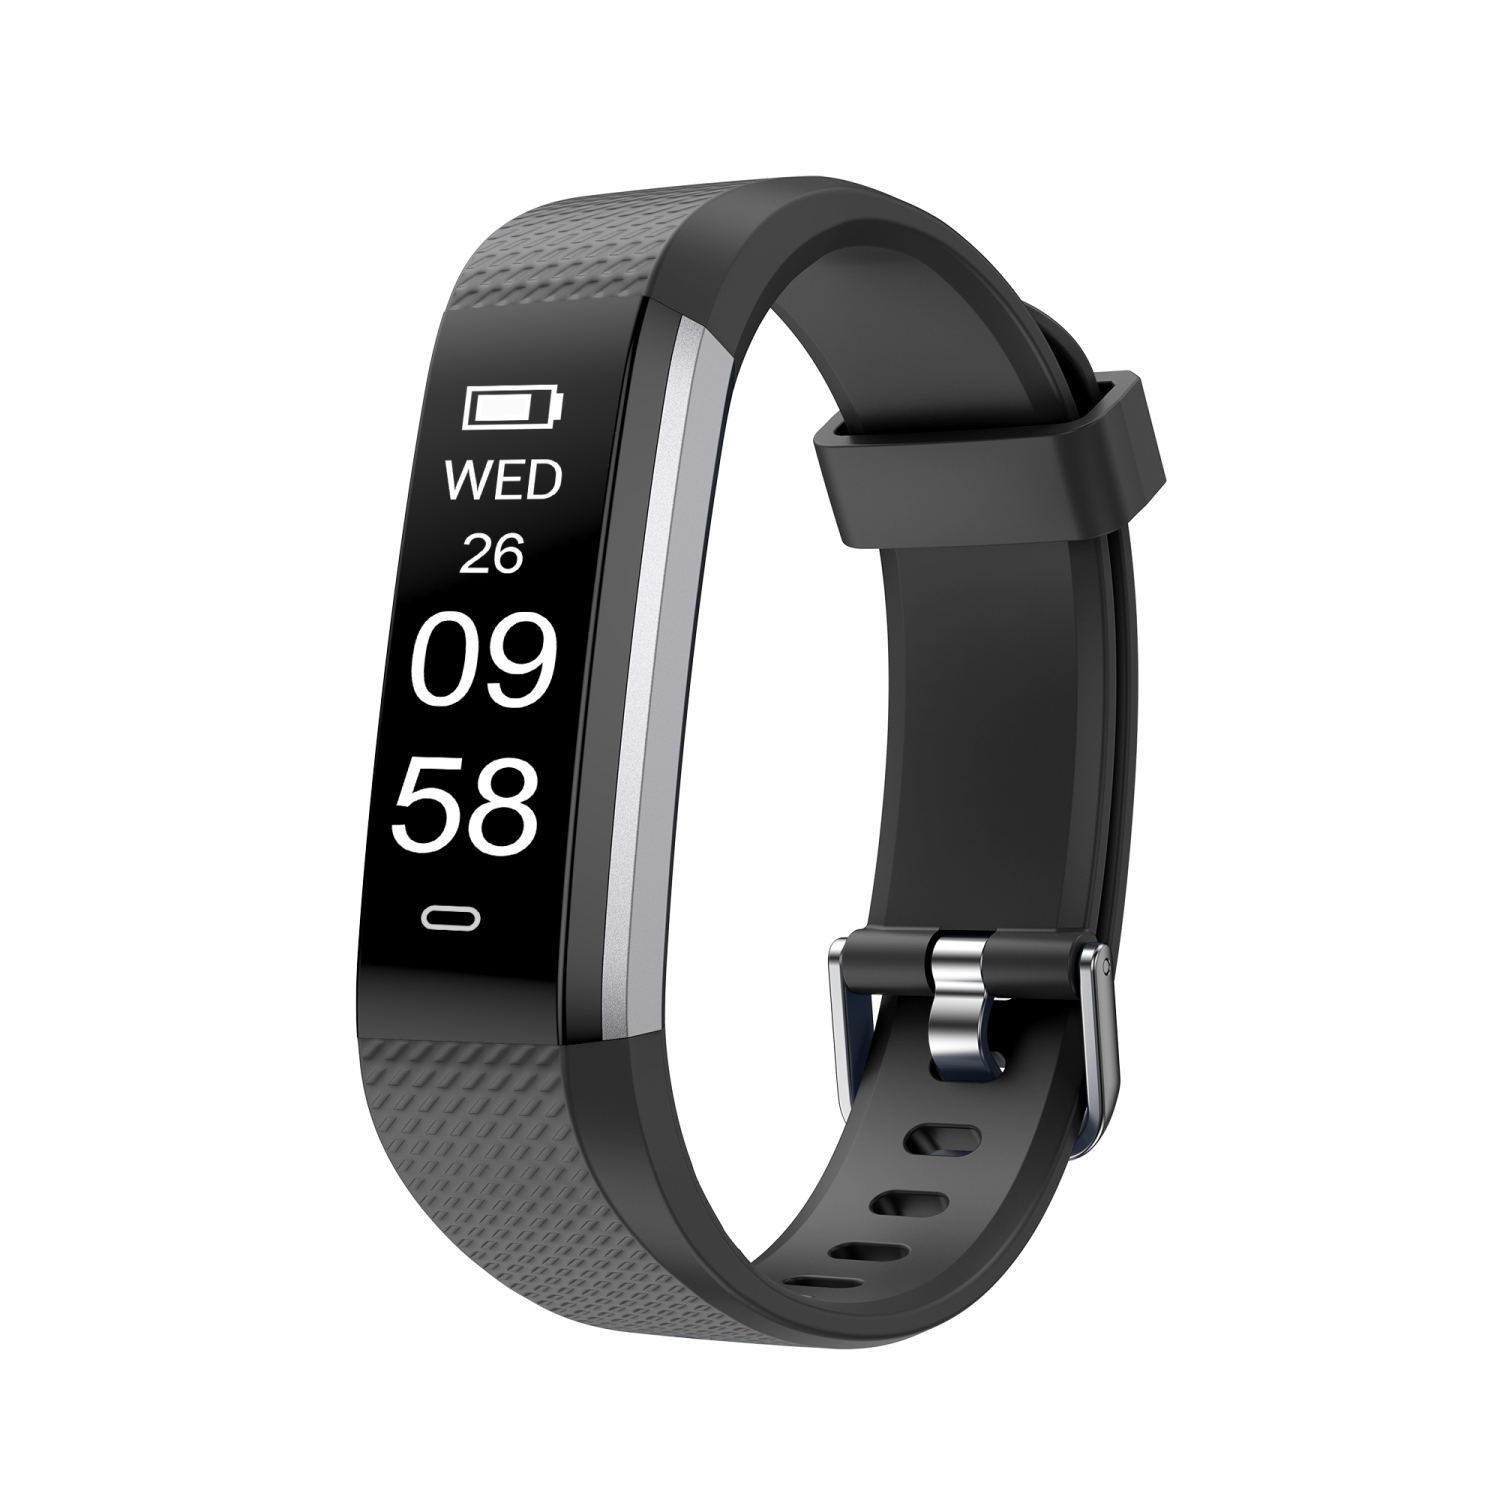 Letscom ID115 Health and Fitness Tracker by Letsfit - Black